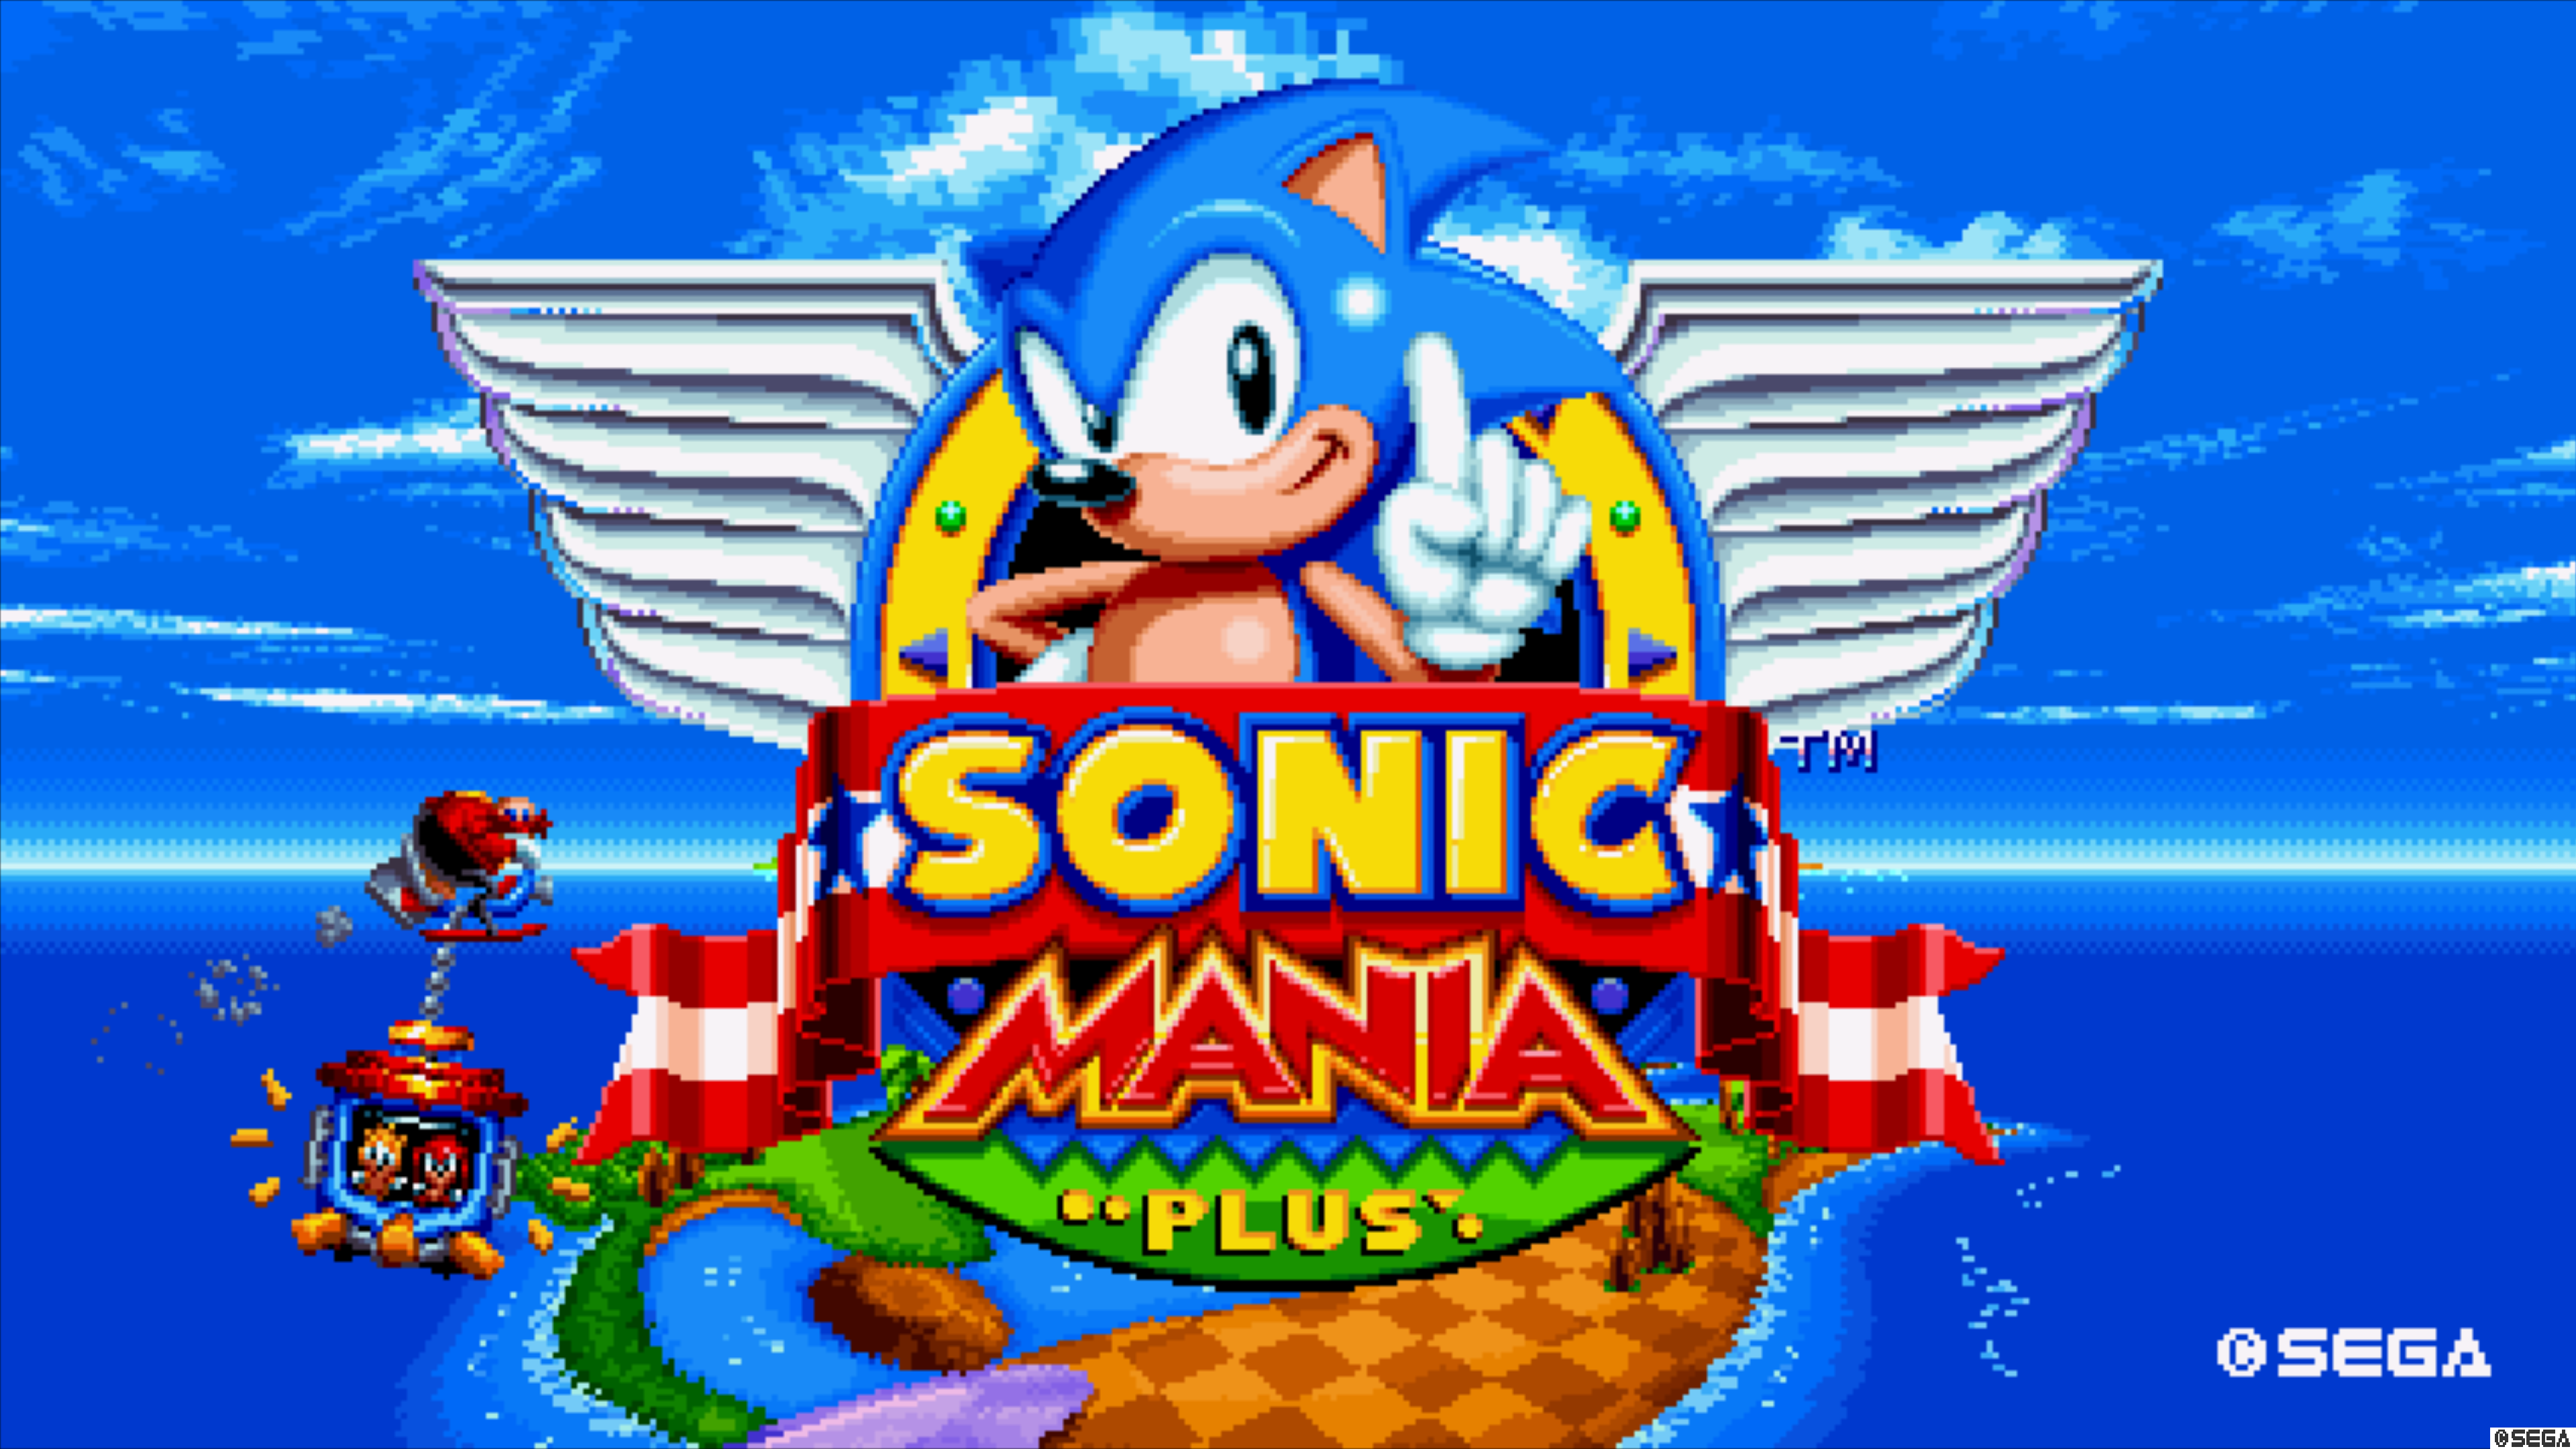 Sonic Mania Cheats - All Cheat Codes, What They Do, and How to Use Them -  Guide